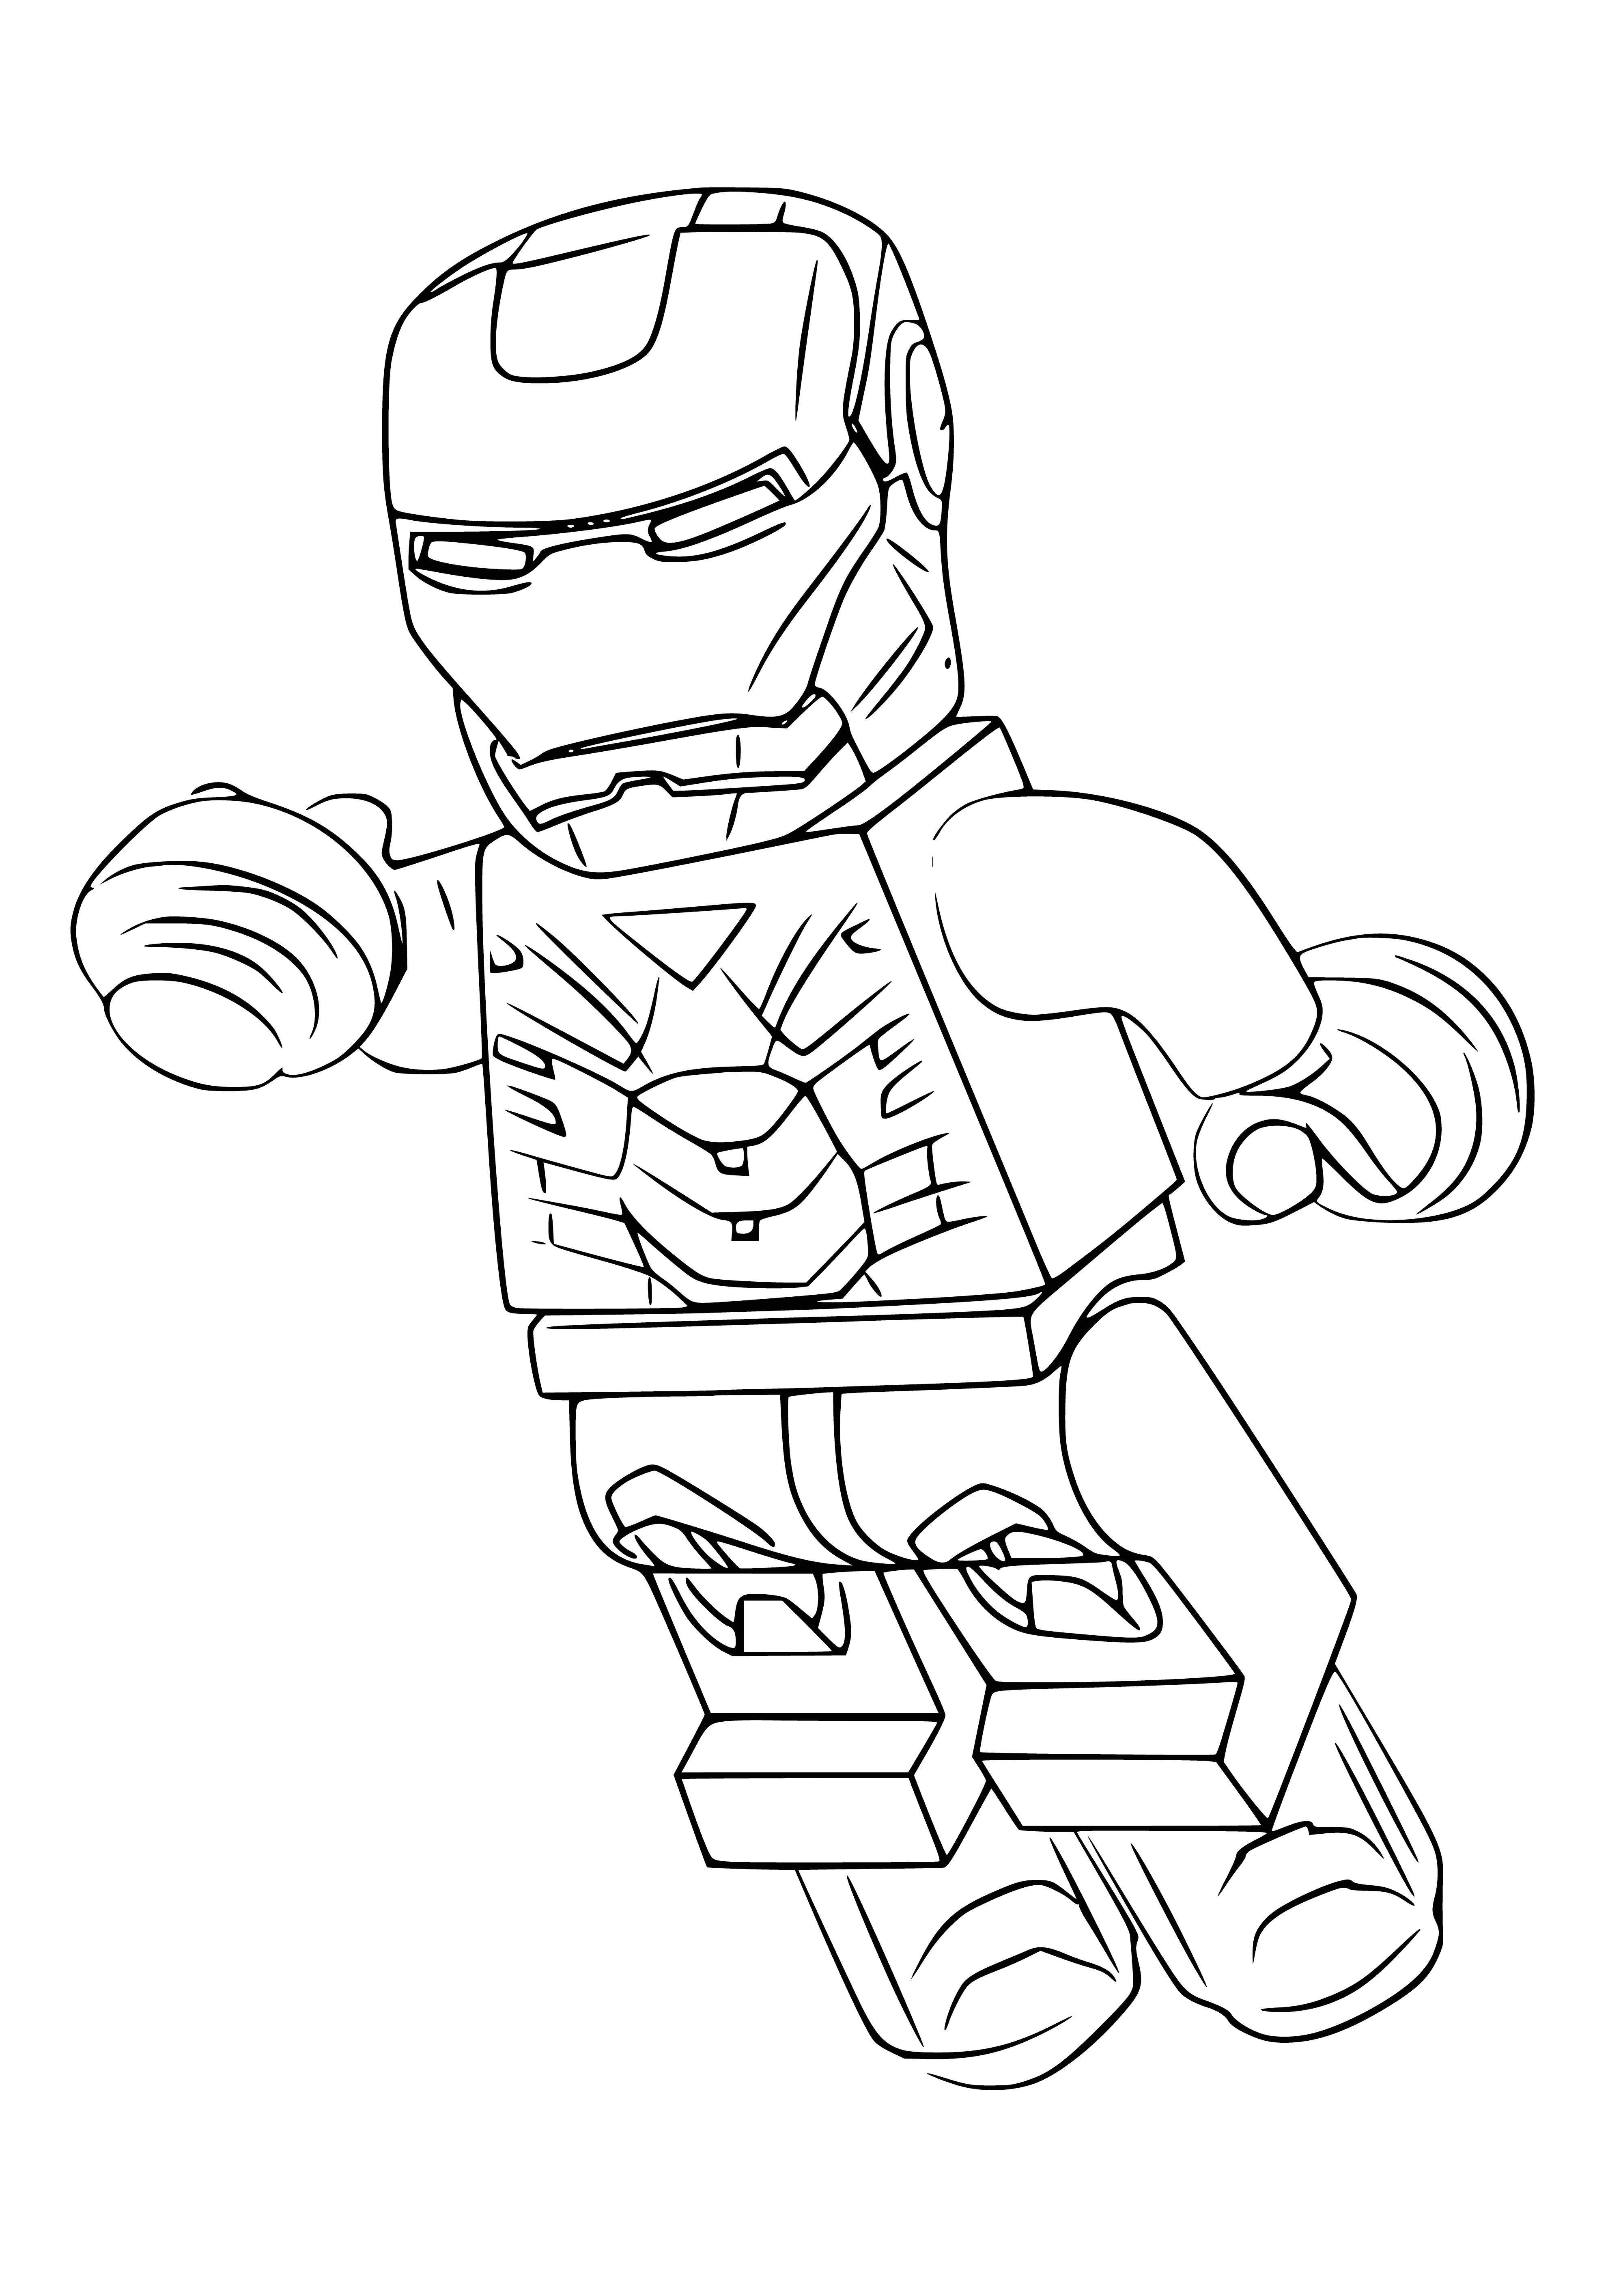 coloring page: Lego Iron Man stands on a circular baseplate & wears a red & gold suit w/black arc reactor & wings. He's holding a black gun in his right hand. #lego #superhero